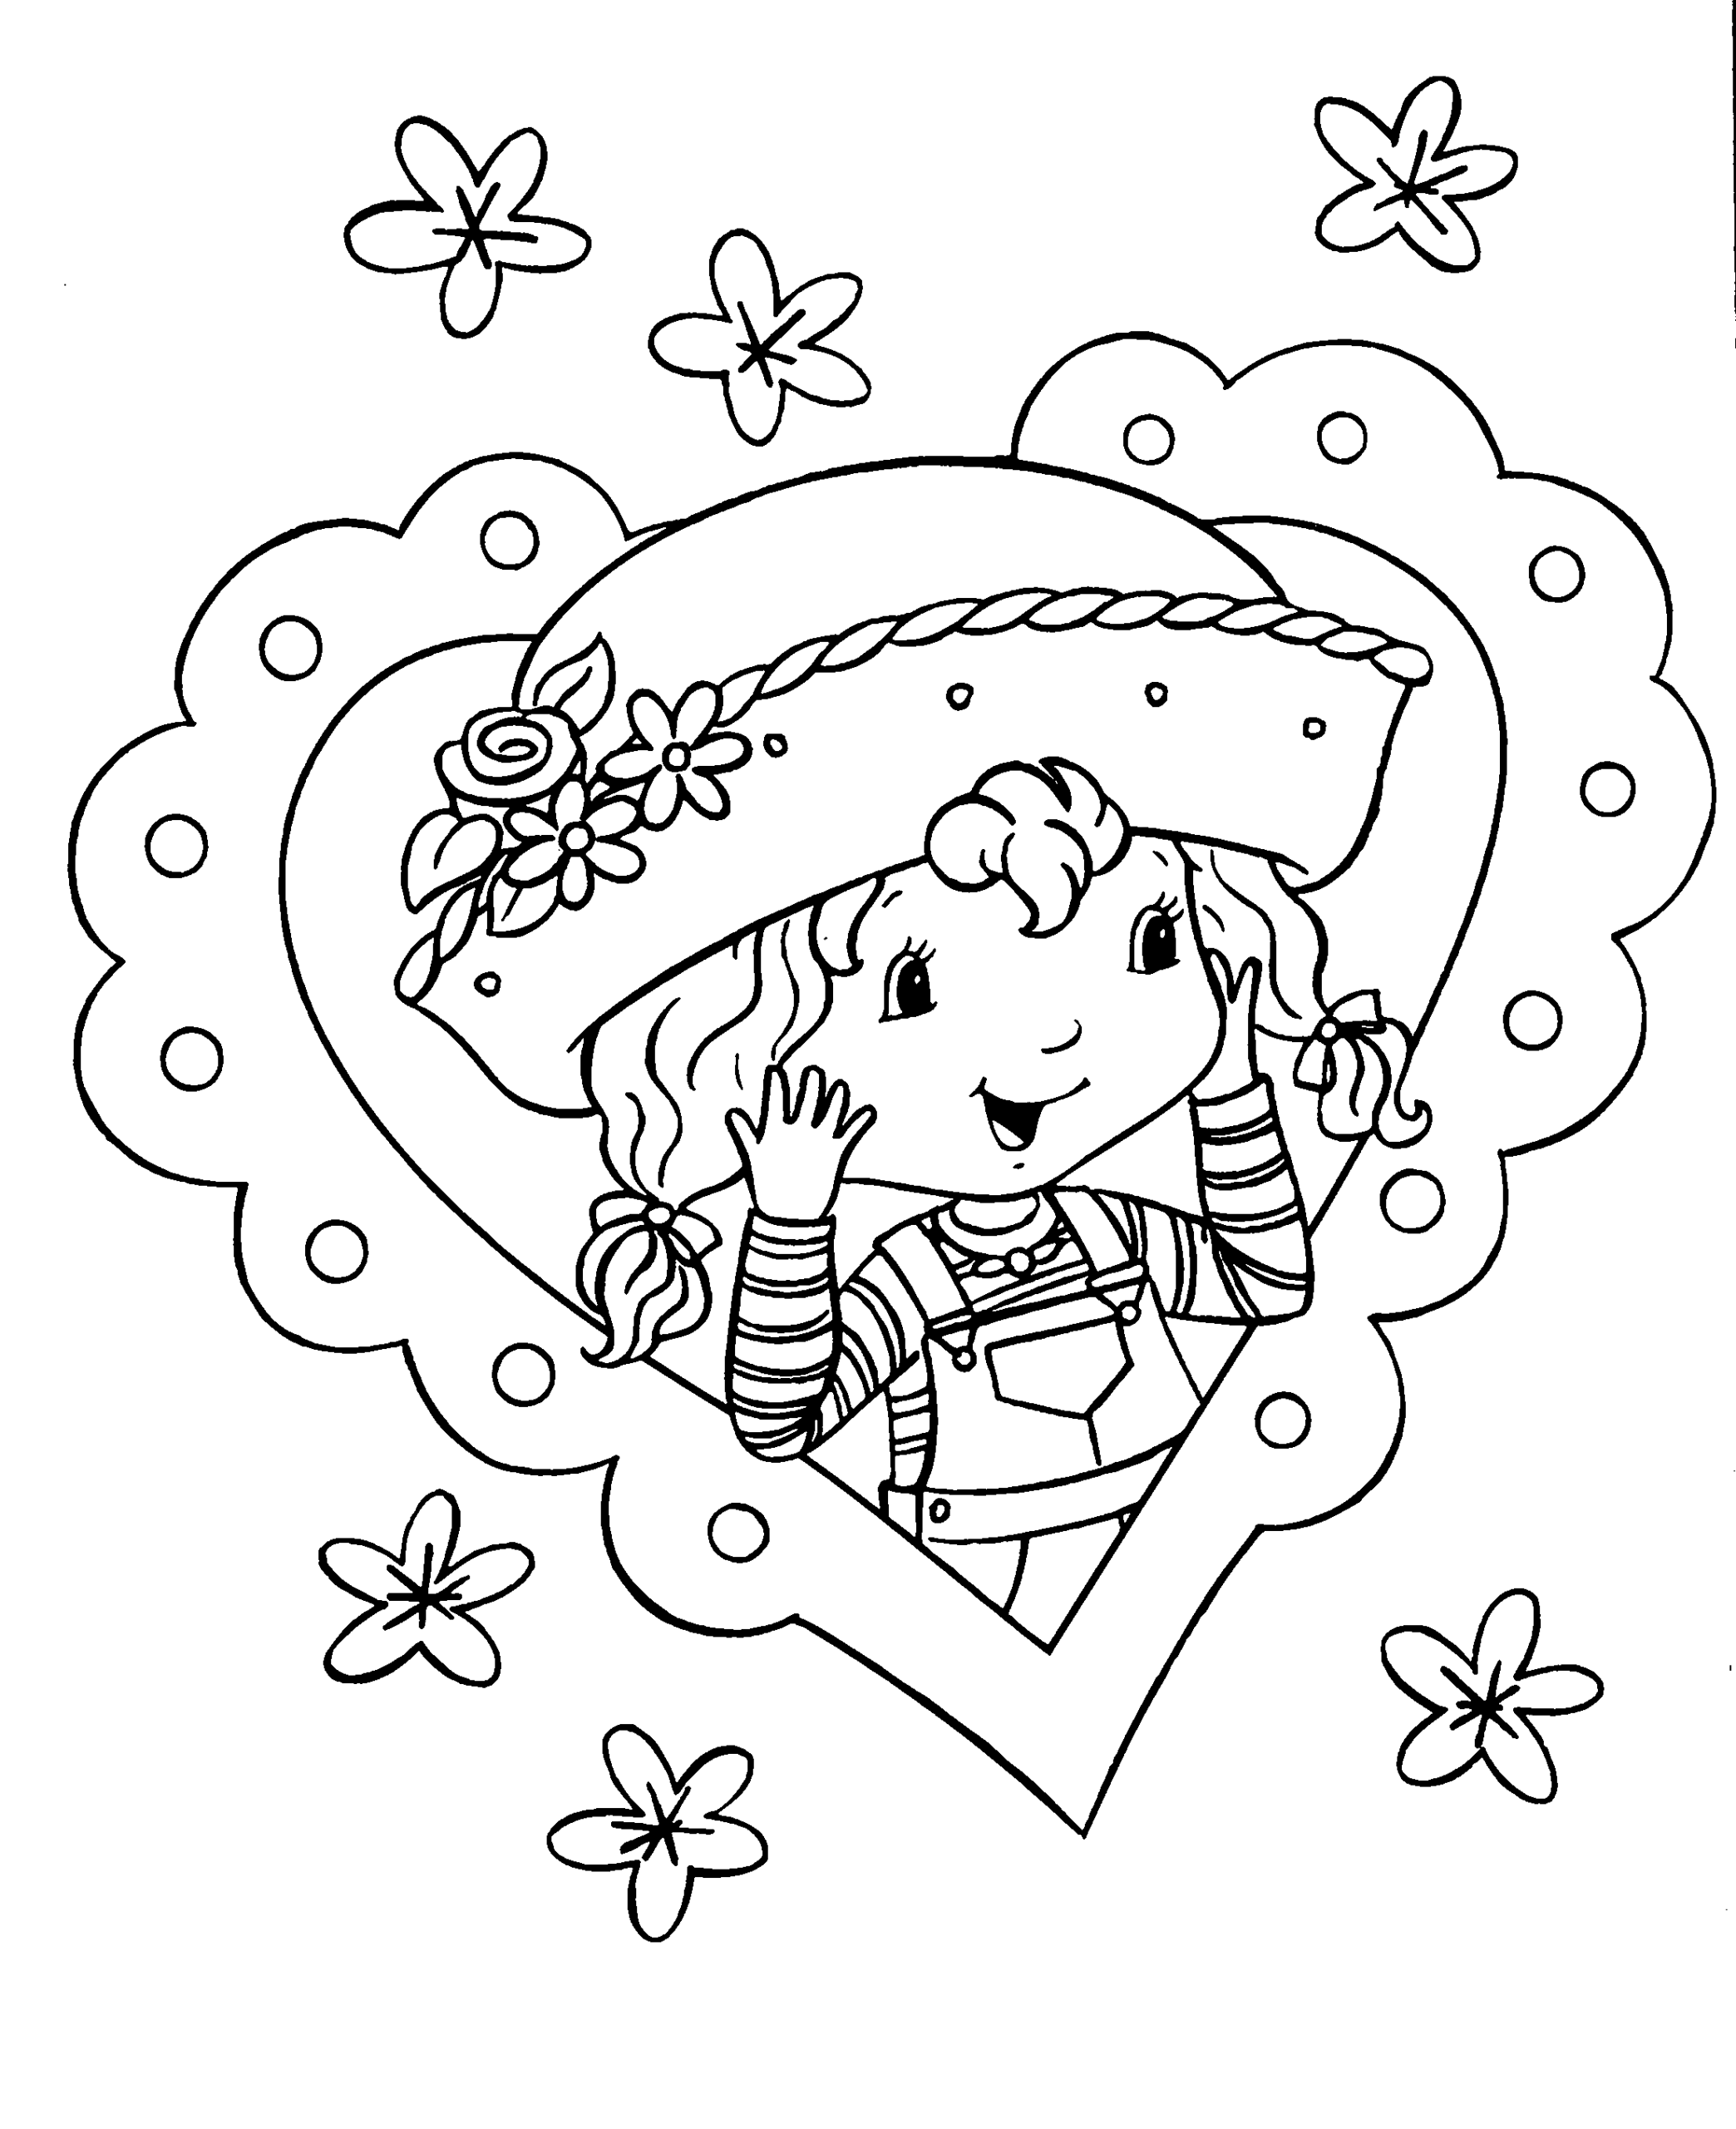 Strawberry Shortcake Coloring Pages TV Film Printable 2020 08097 Coloring4free